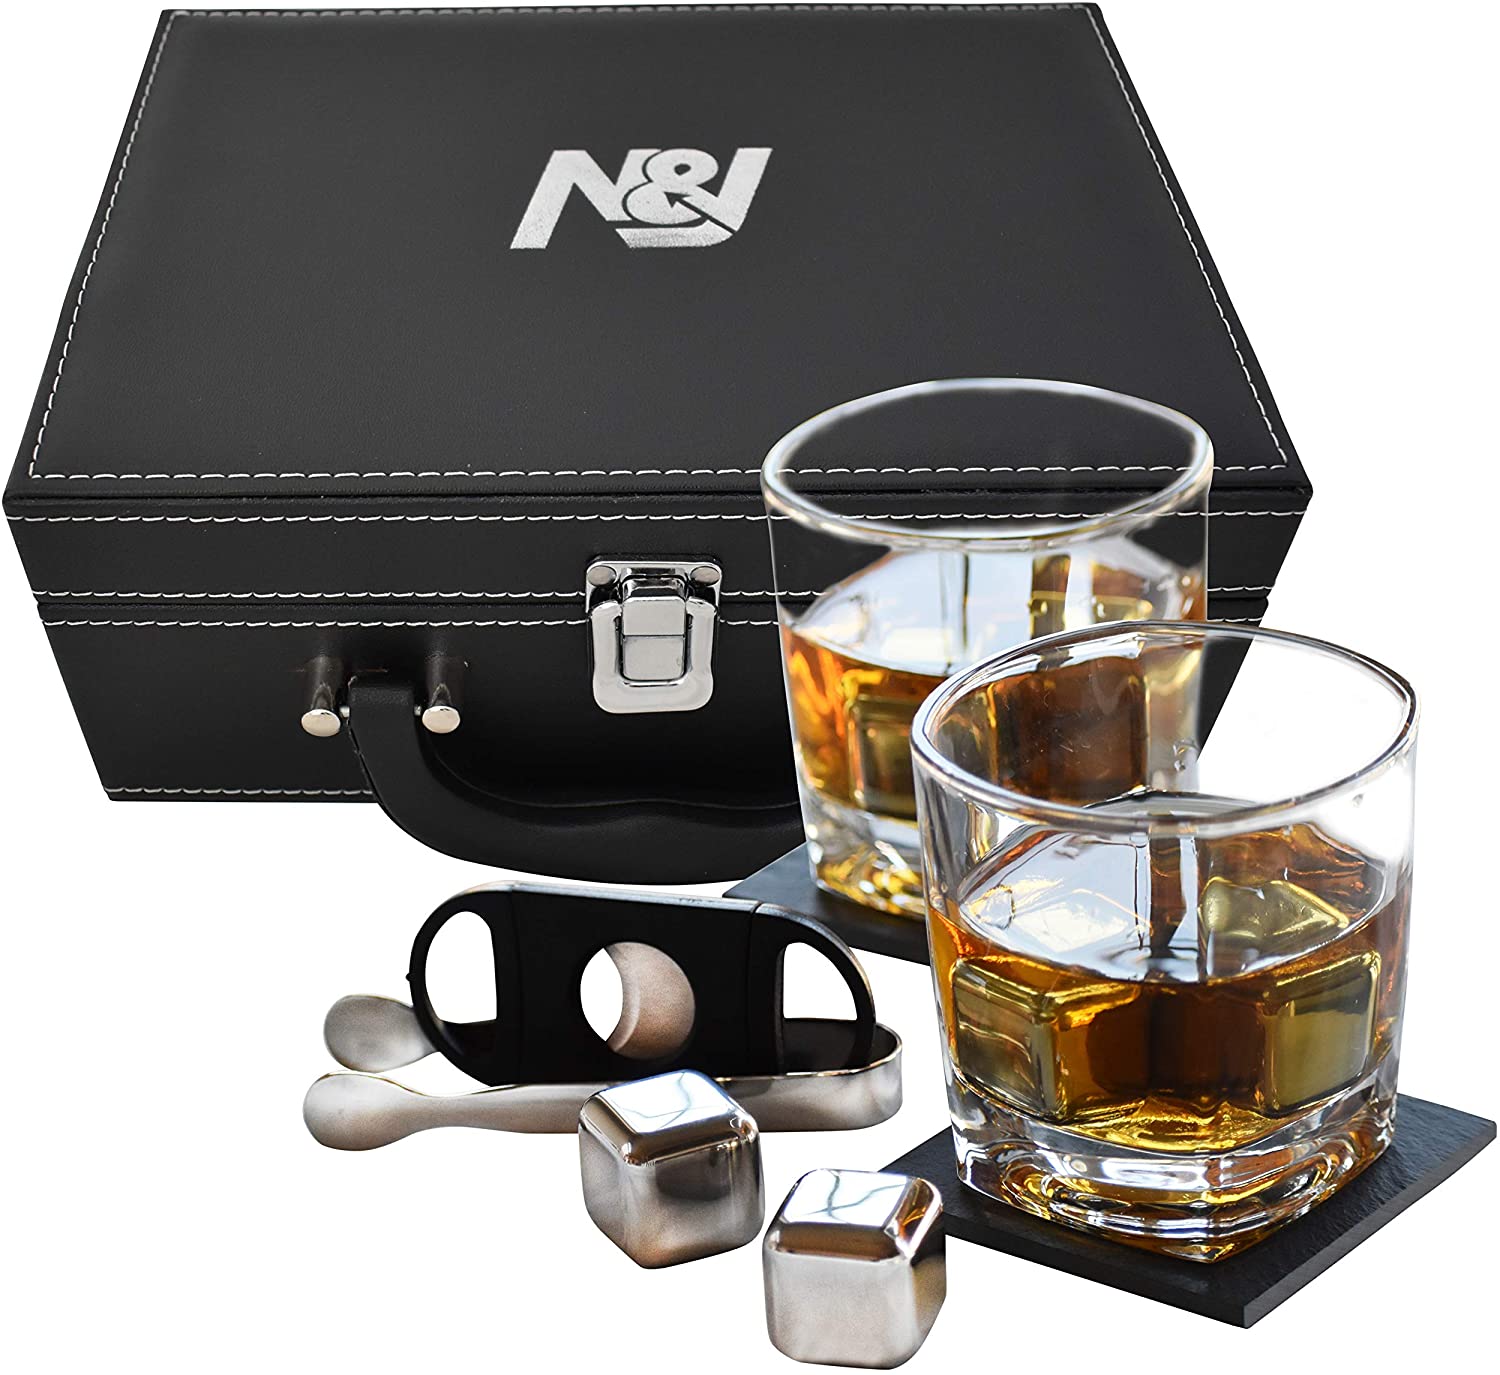 Wholesale Discount On The Rocks - Father’s Day Gift Whisky Glass And Stone Set 2 Large Square Whiskey Glasses stainless steel Whisky Rocks Chilling Stones In Leather Box – Shunstone